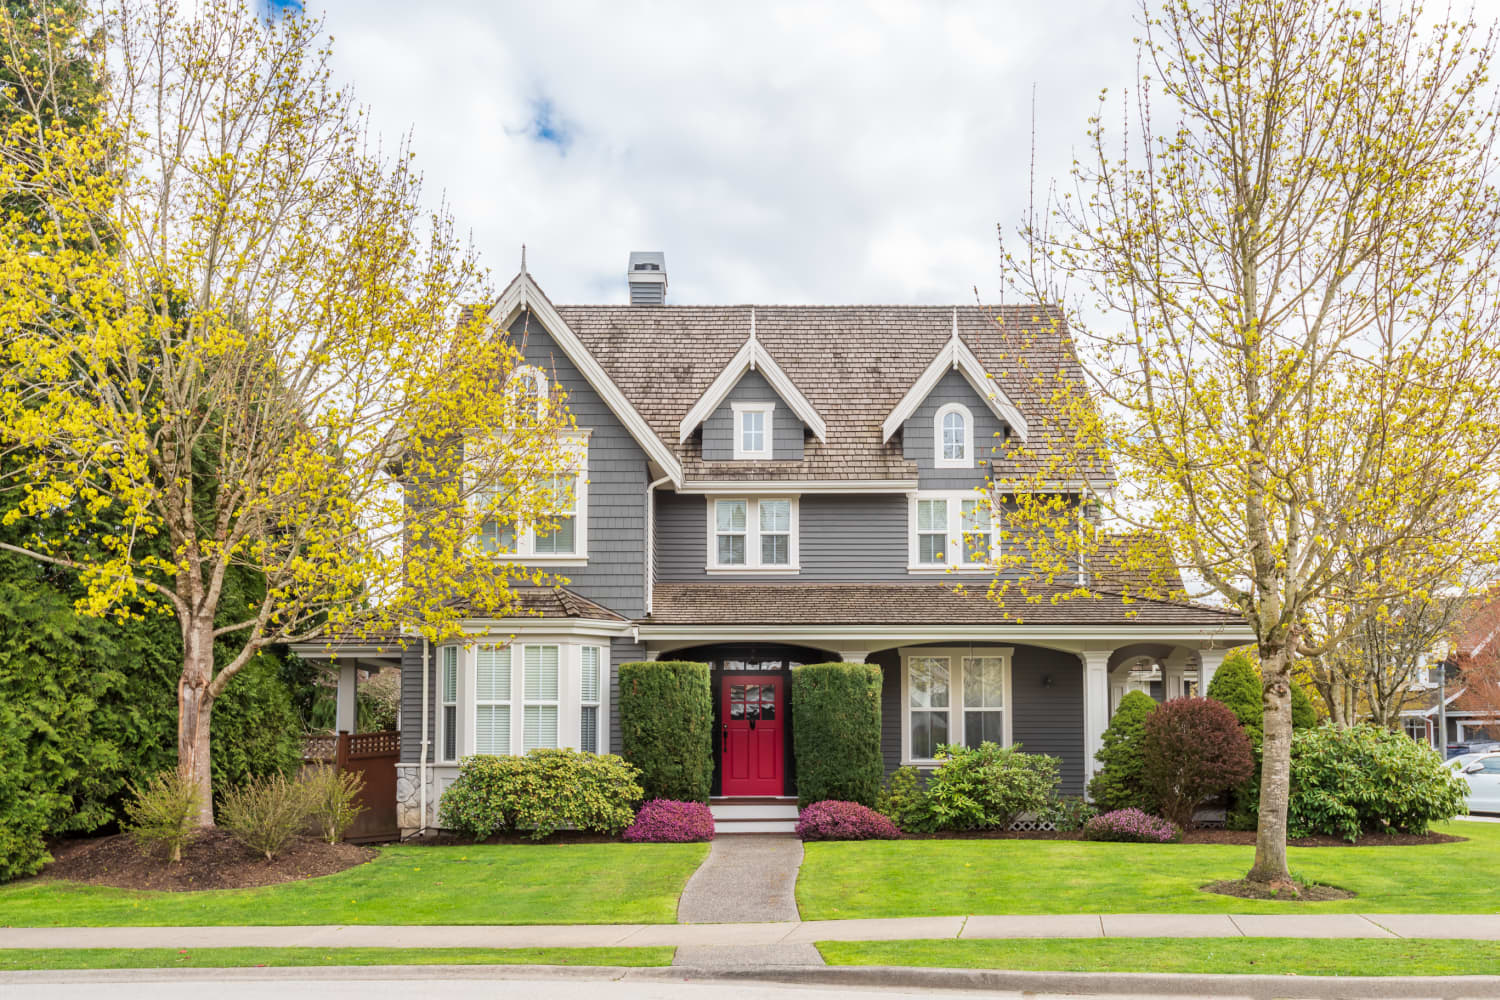 Even with High Interest Rates, Now May Still Be the Best Time to Buy a House